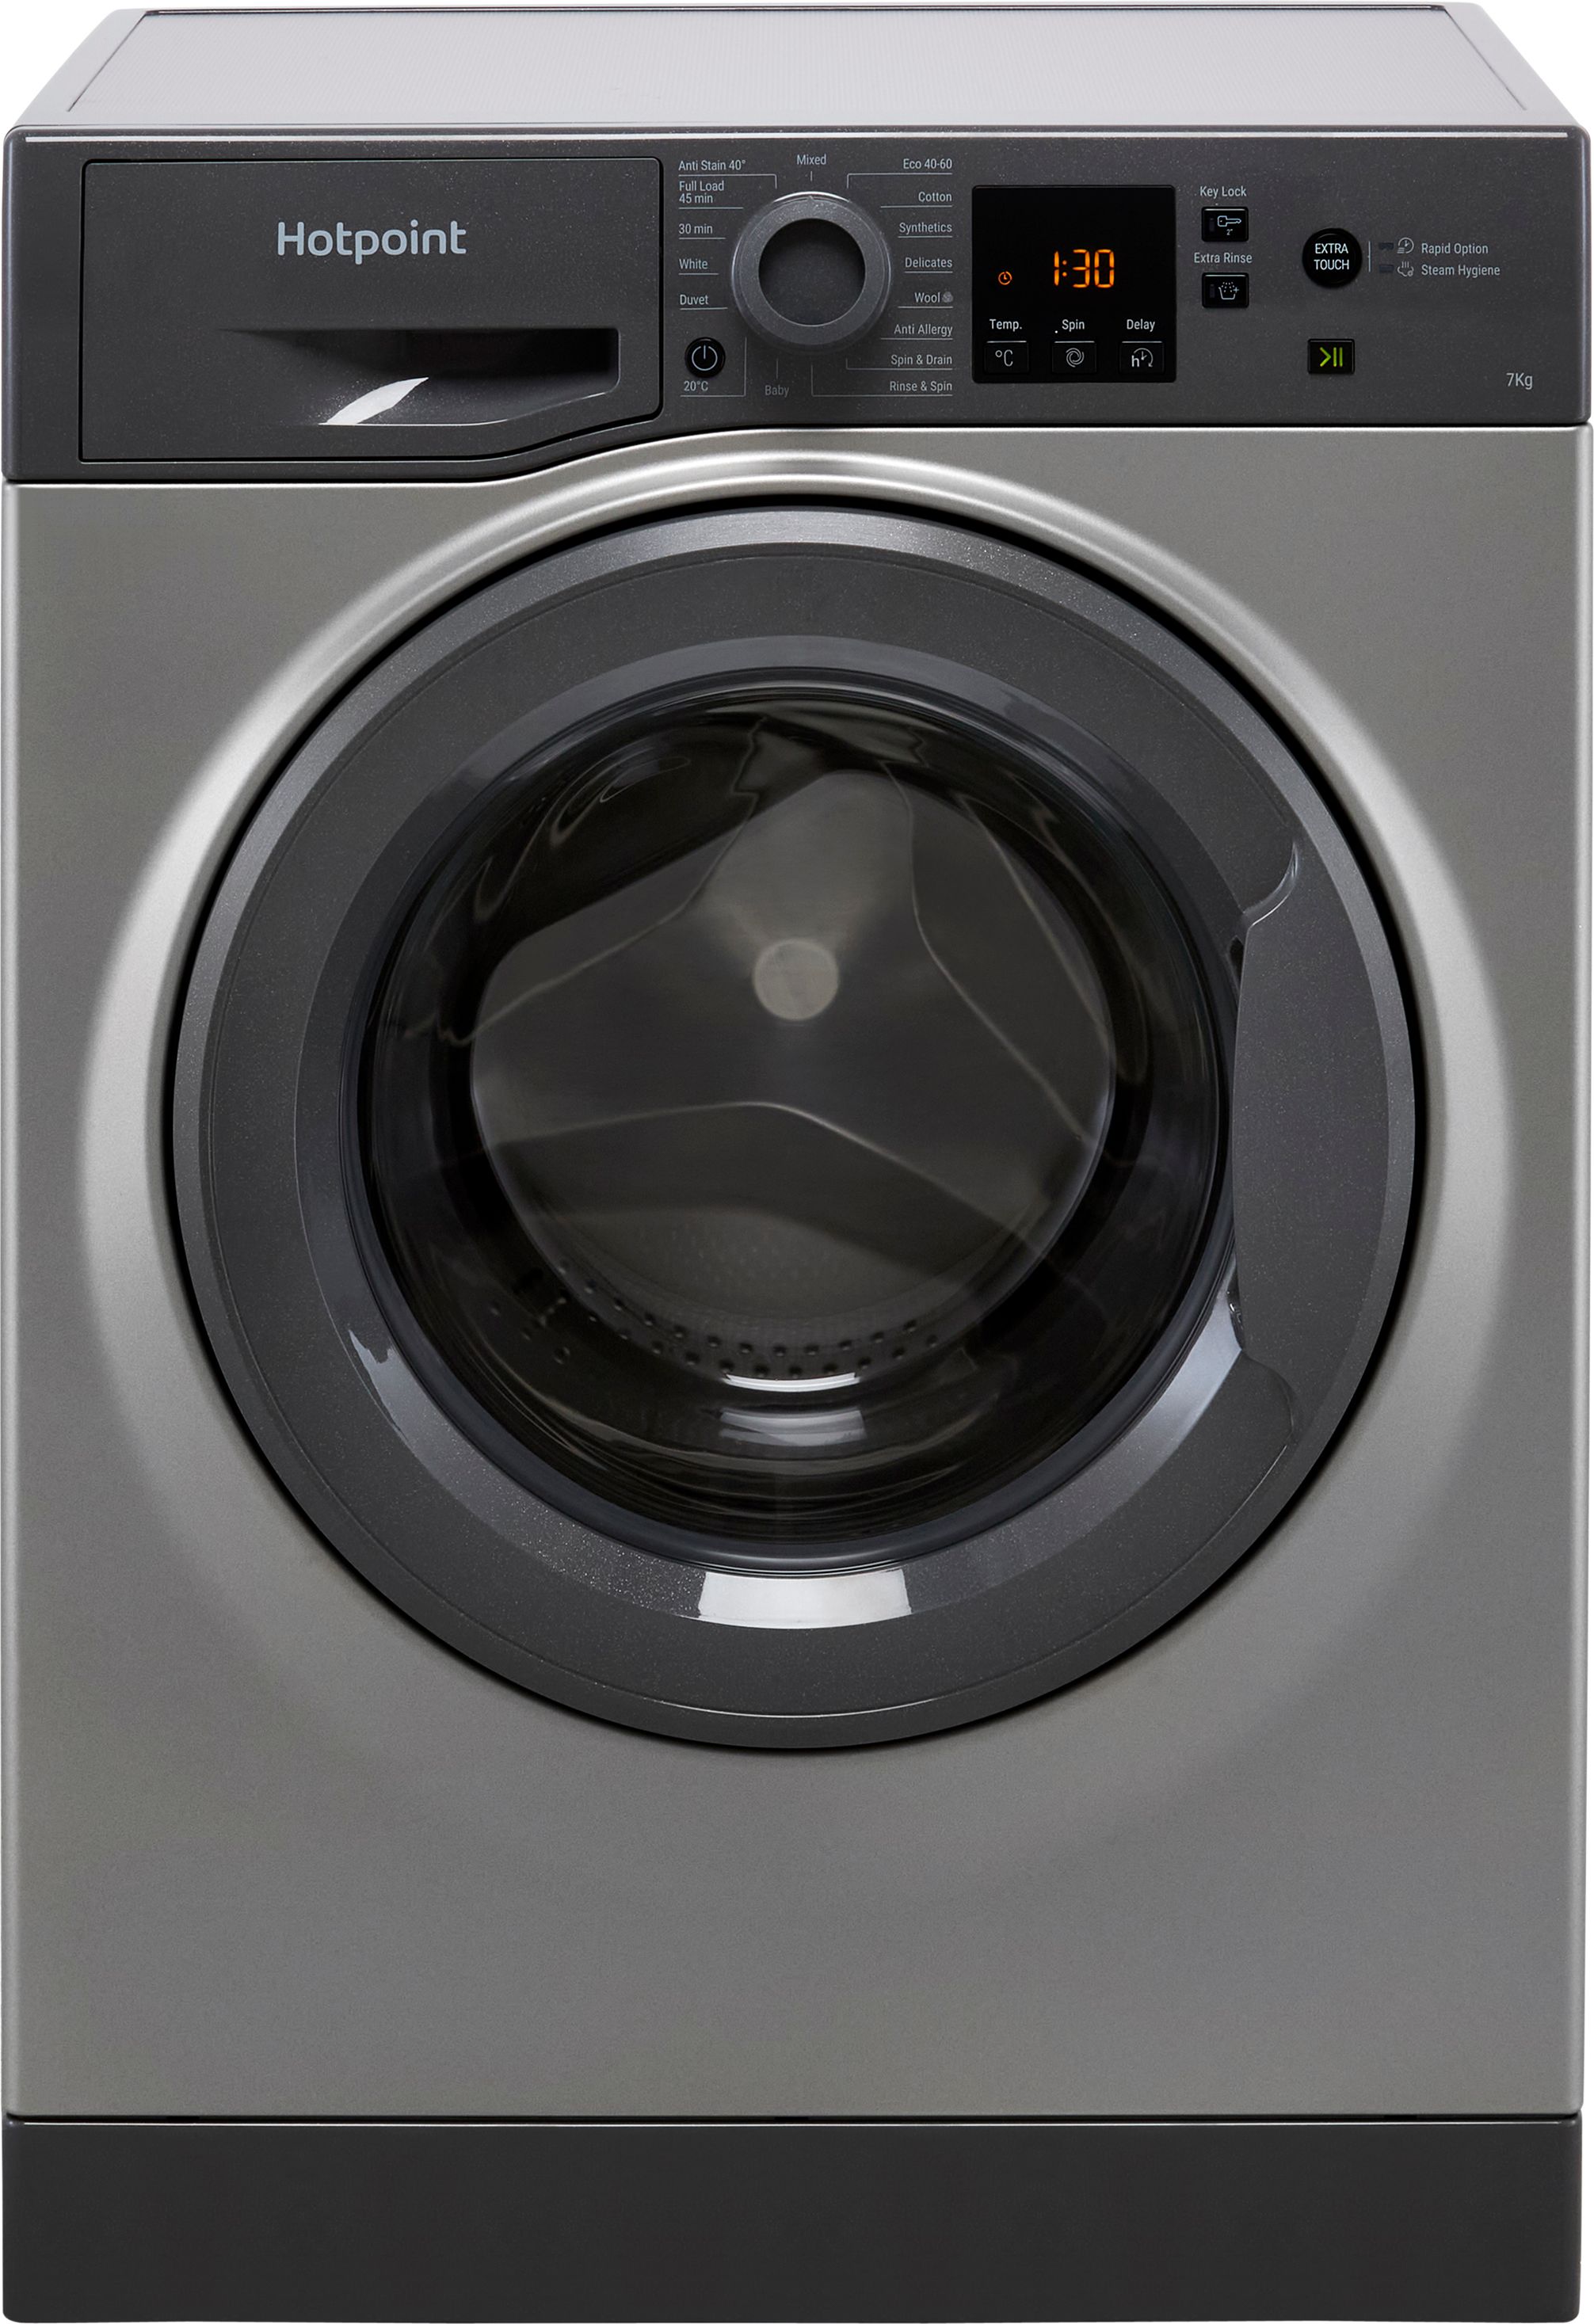 Hotpoint NSWM743UGGUKN 7kg Washing Machine with 1400 rpm - Graphite - D Rated, Silver